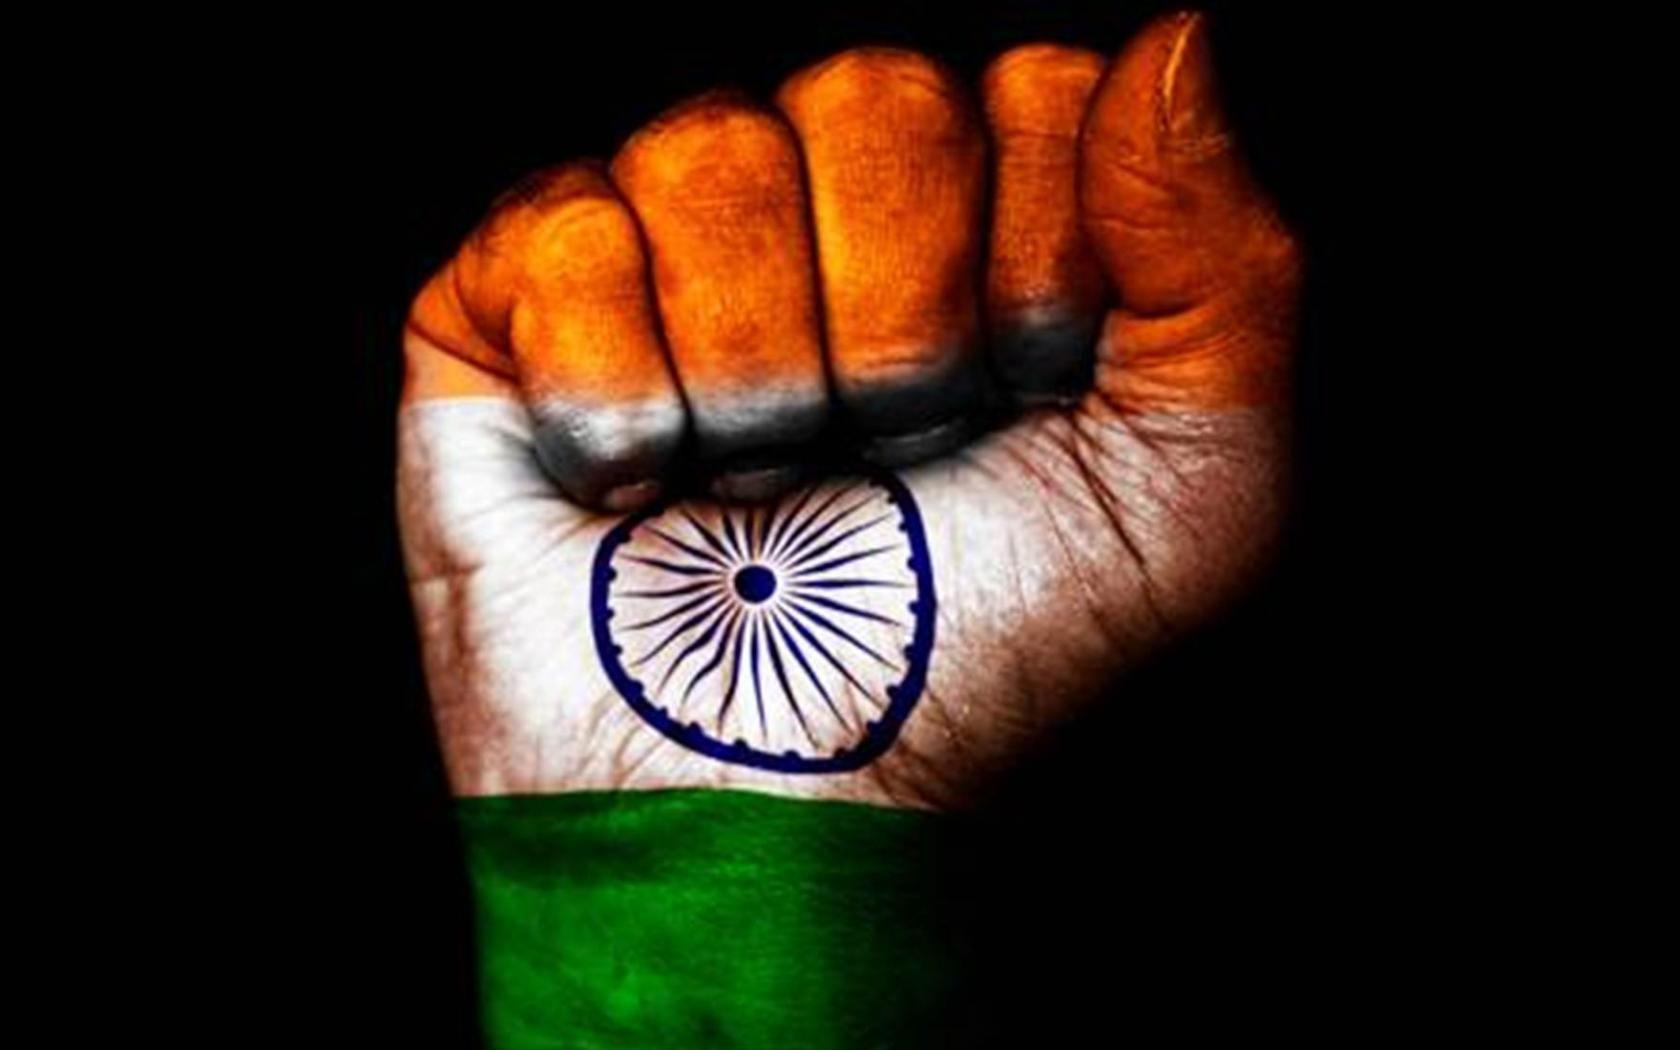 Indian Flag Image for Happy Republic Day Wallpaper. Wallpaper in HD